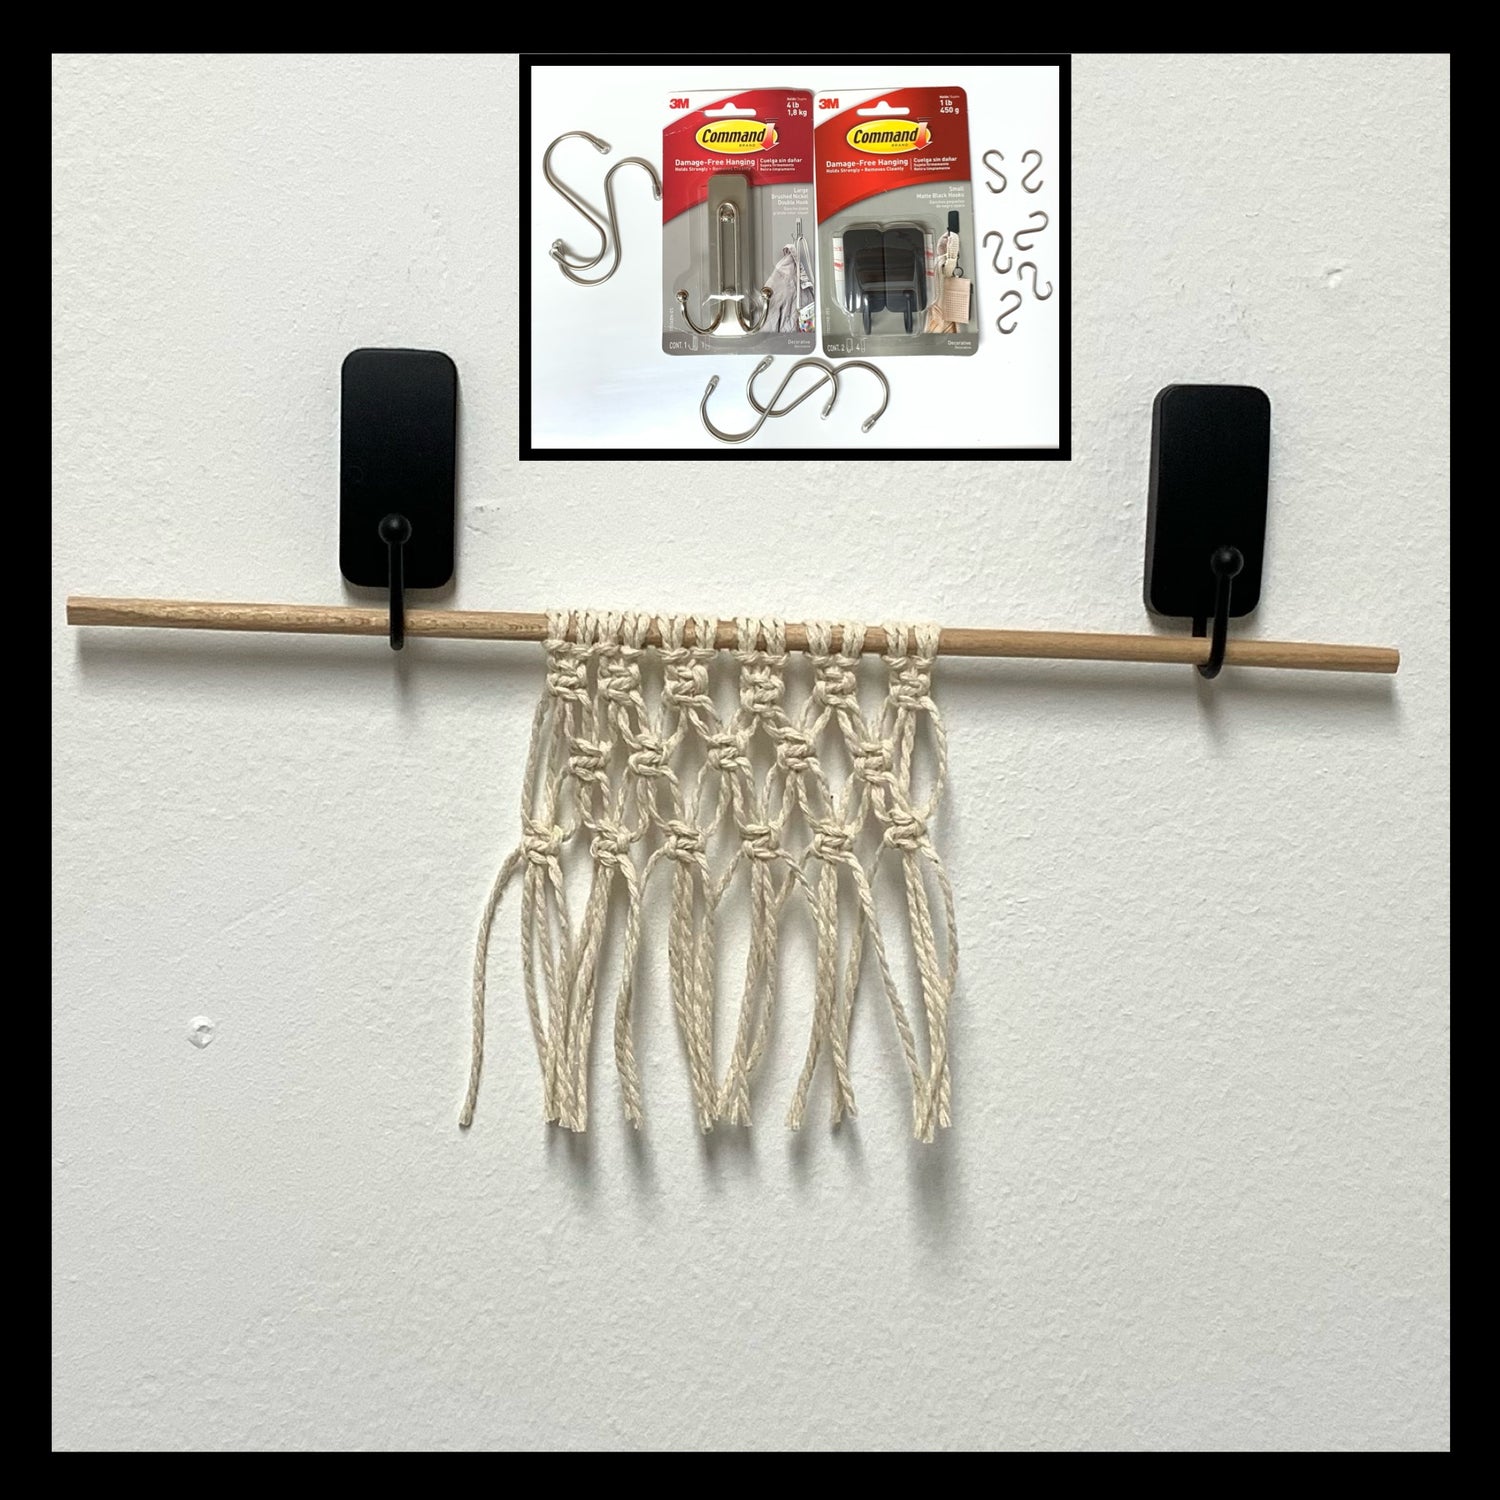 Macrame project hanging on a wall work station. Inset picture of S-Hooks and Adhesive-Backed wall-hanging hooks.